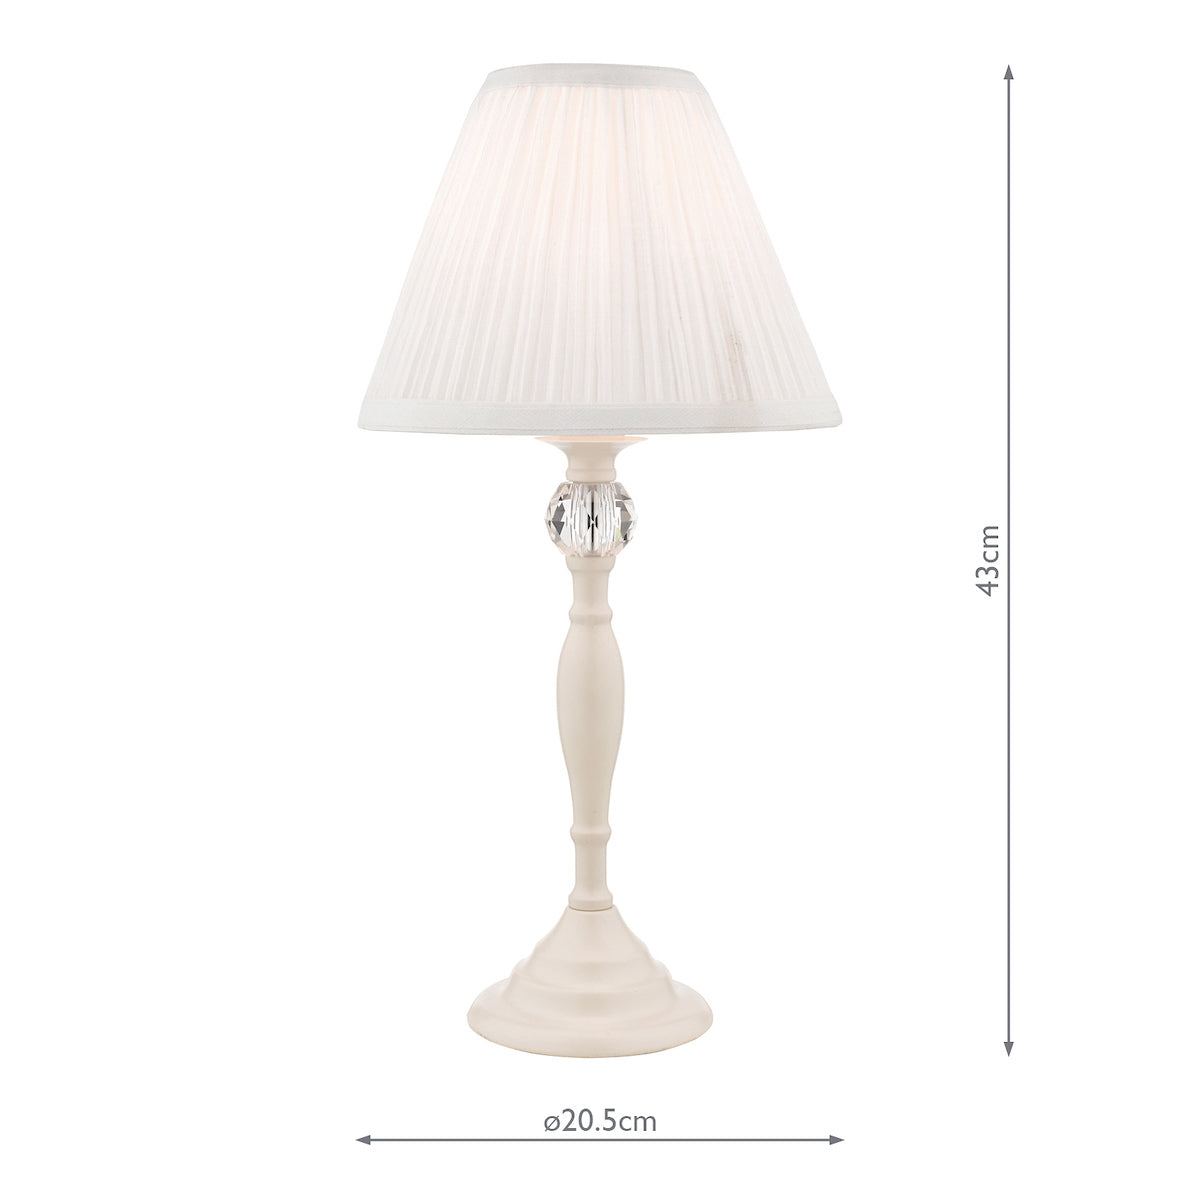 Laura Ashley Ellis Satin-Painted Spindle LA3567334-Q Table Lamp with Ivory Shade